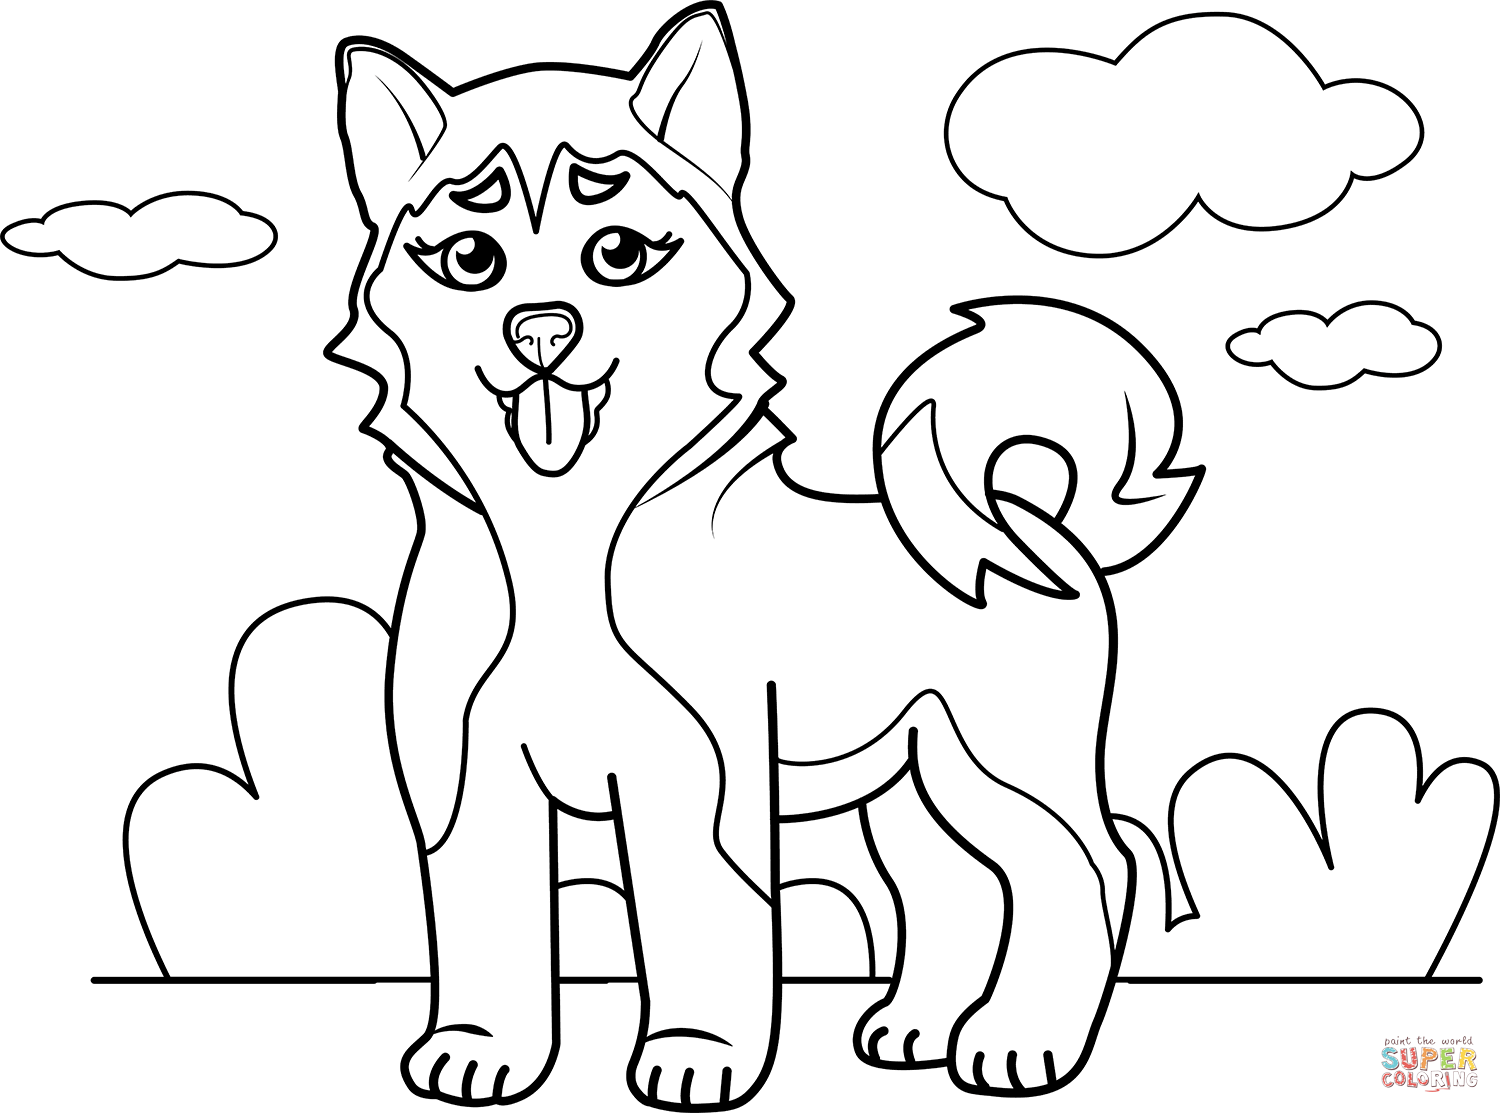 Husky puppy coloring page free printable coloring pages